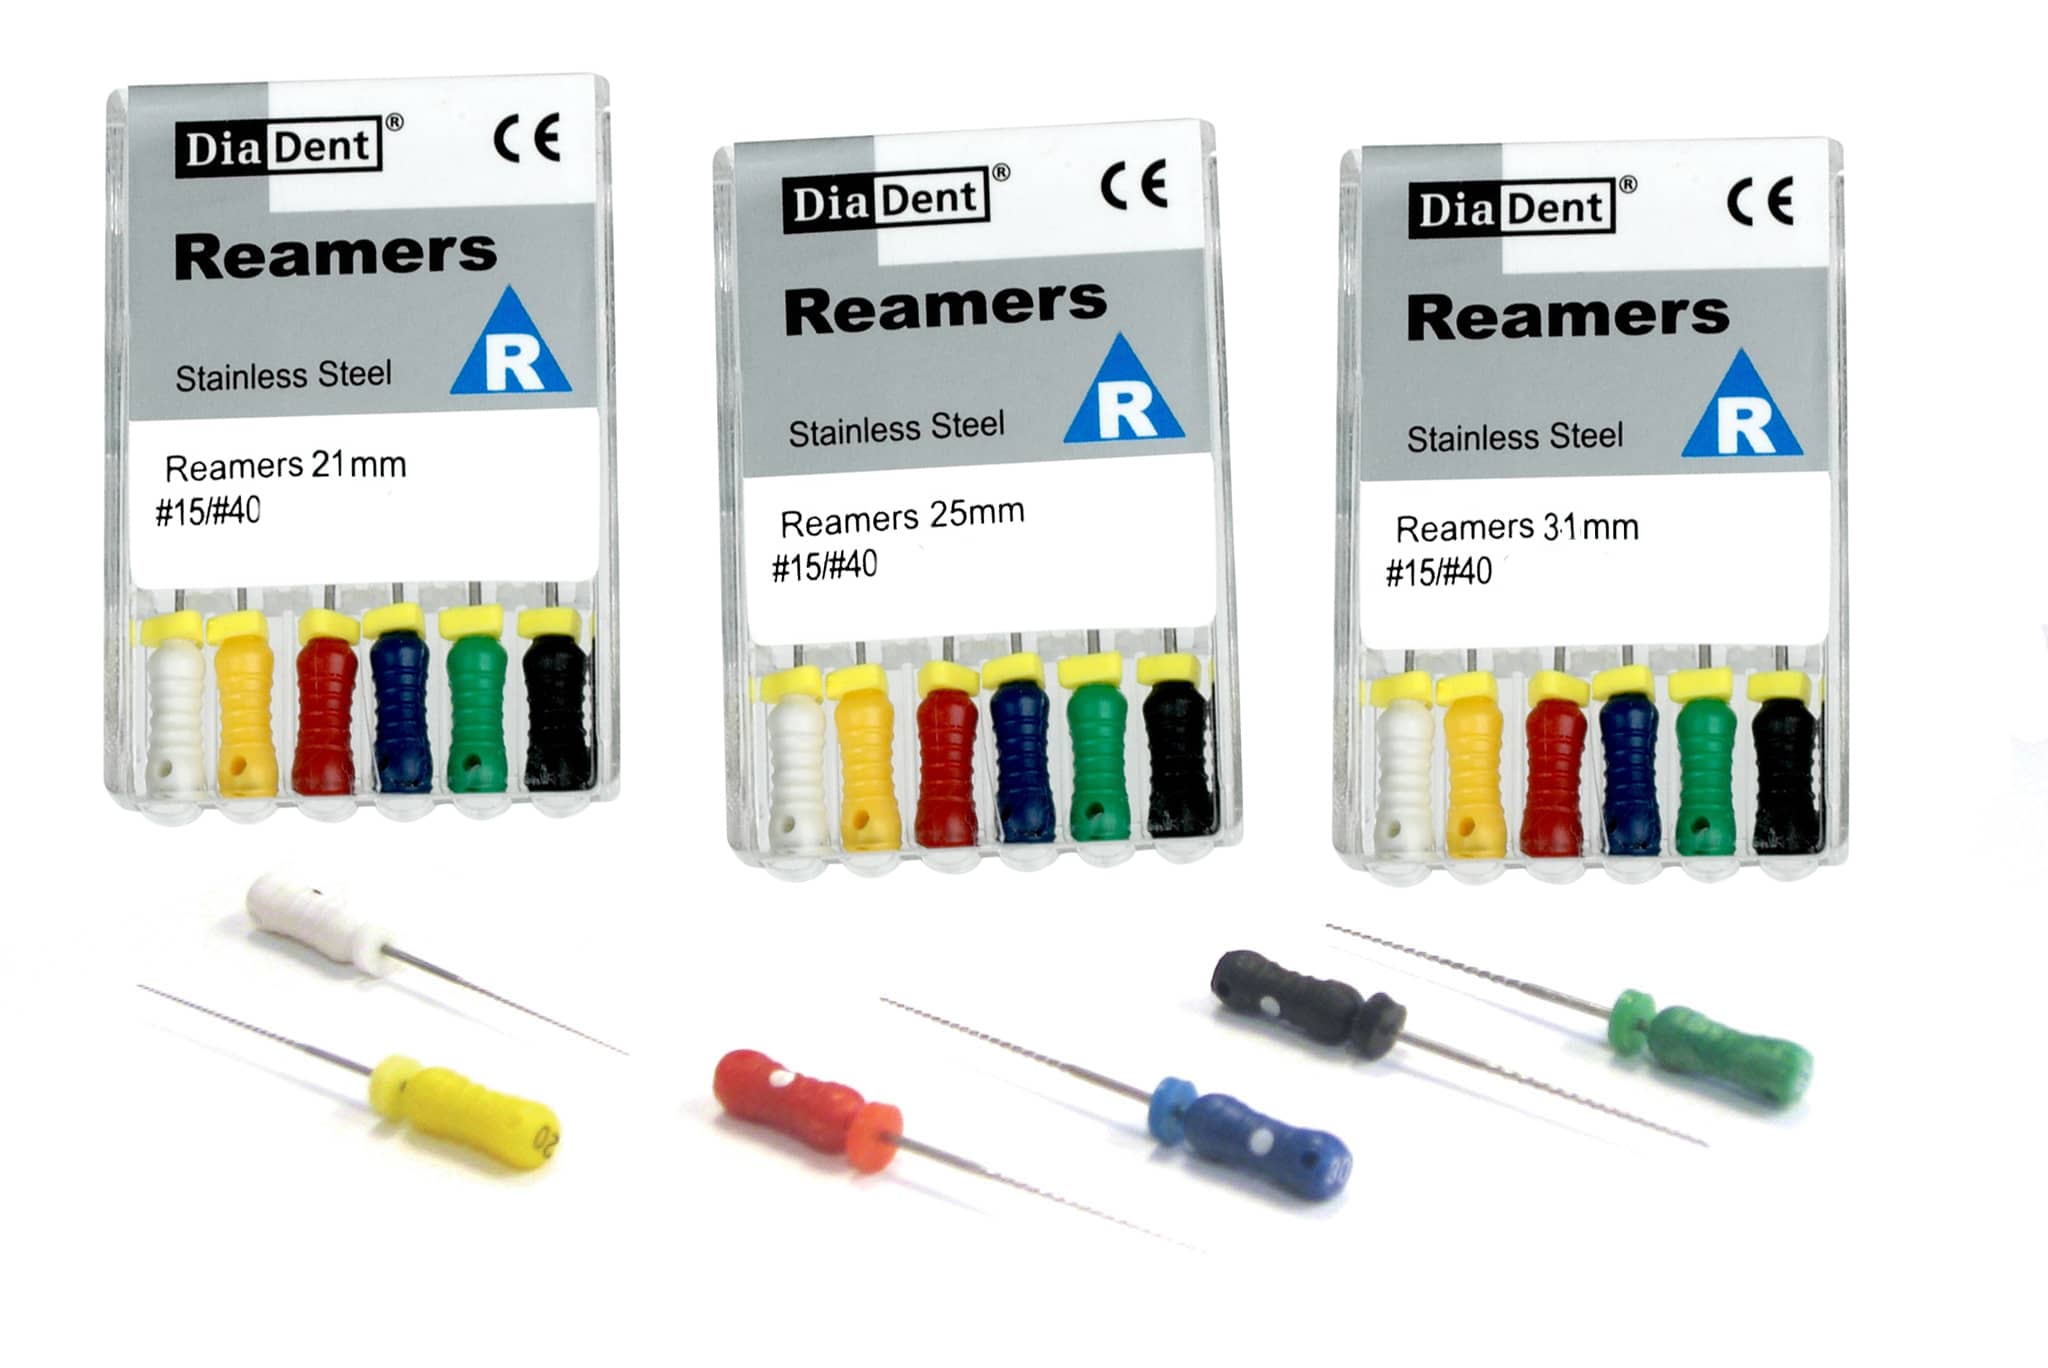 REAMERS Diadent 31mm - 15/40